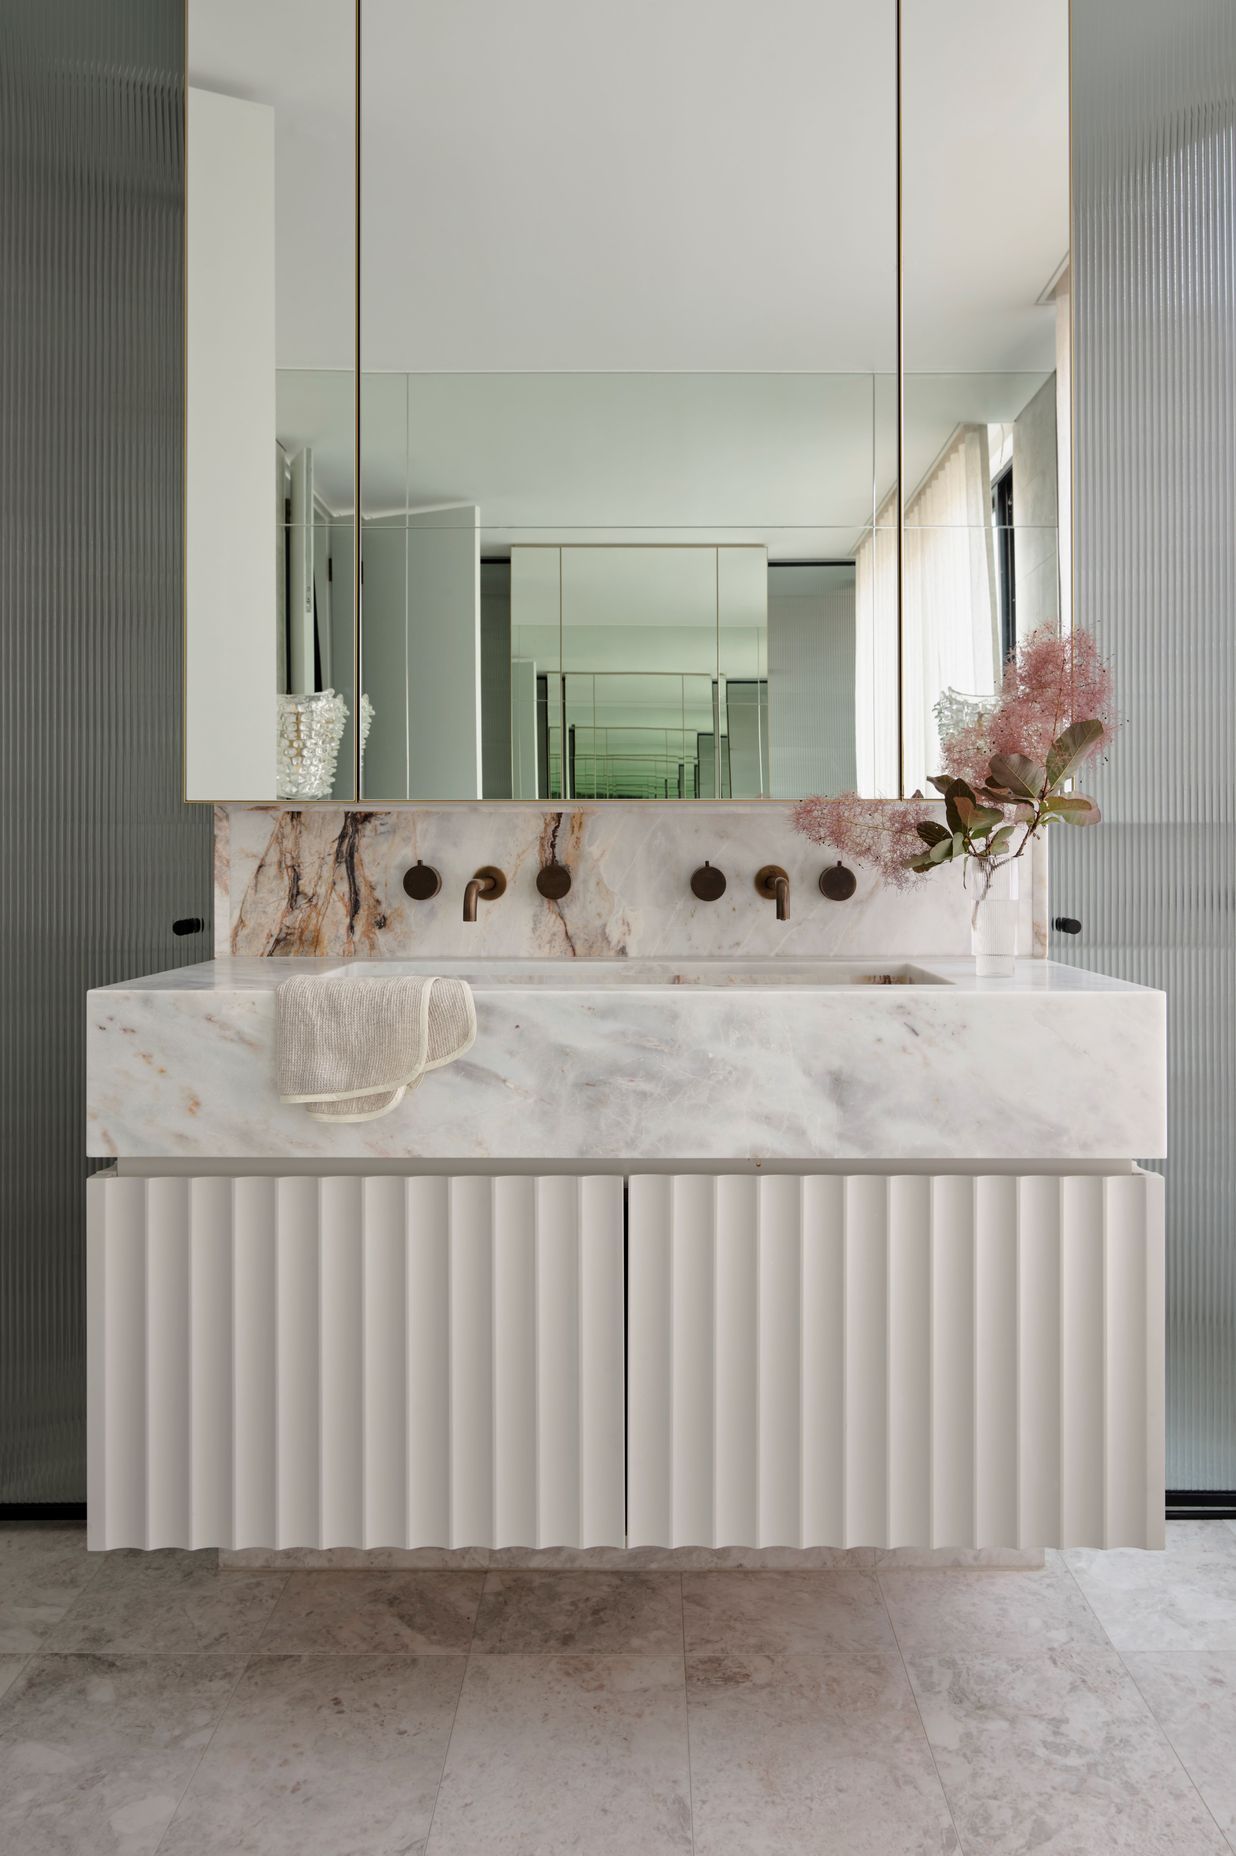 Skheme's Palladian marble features on the counter top and their Epoca Blush tiles are displayed on the floor.